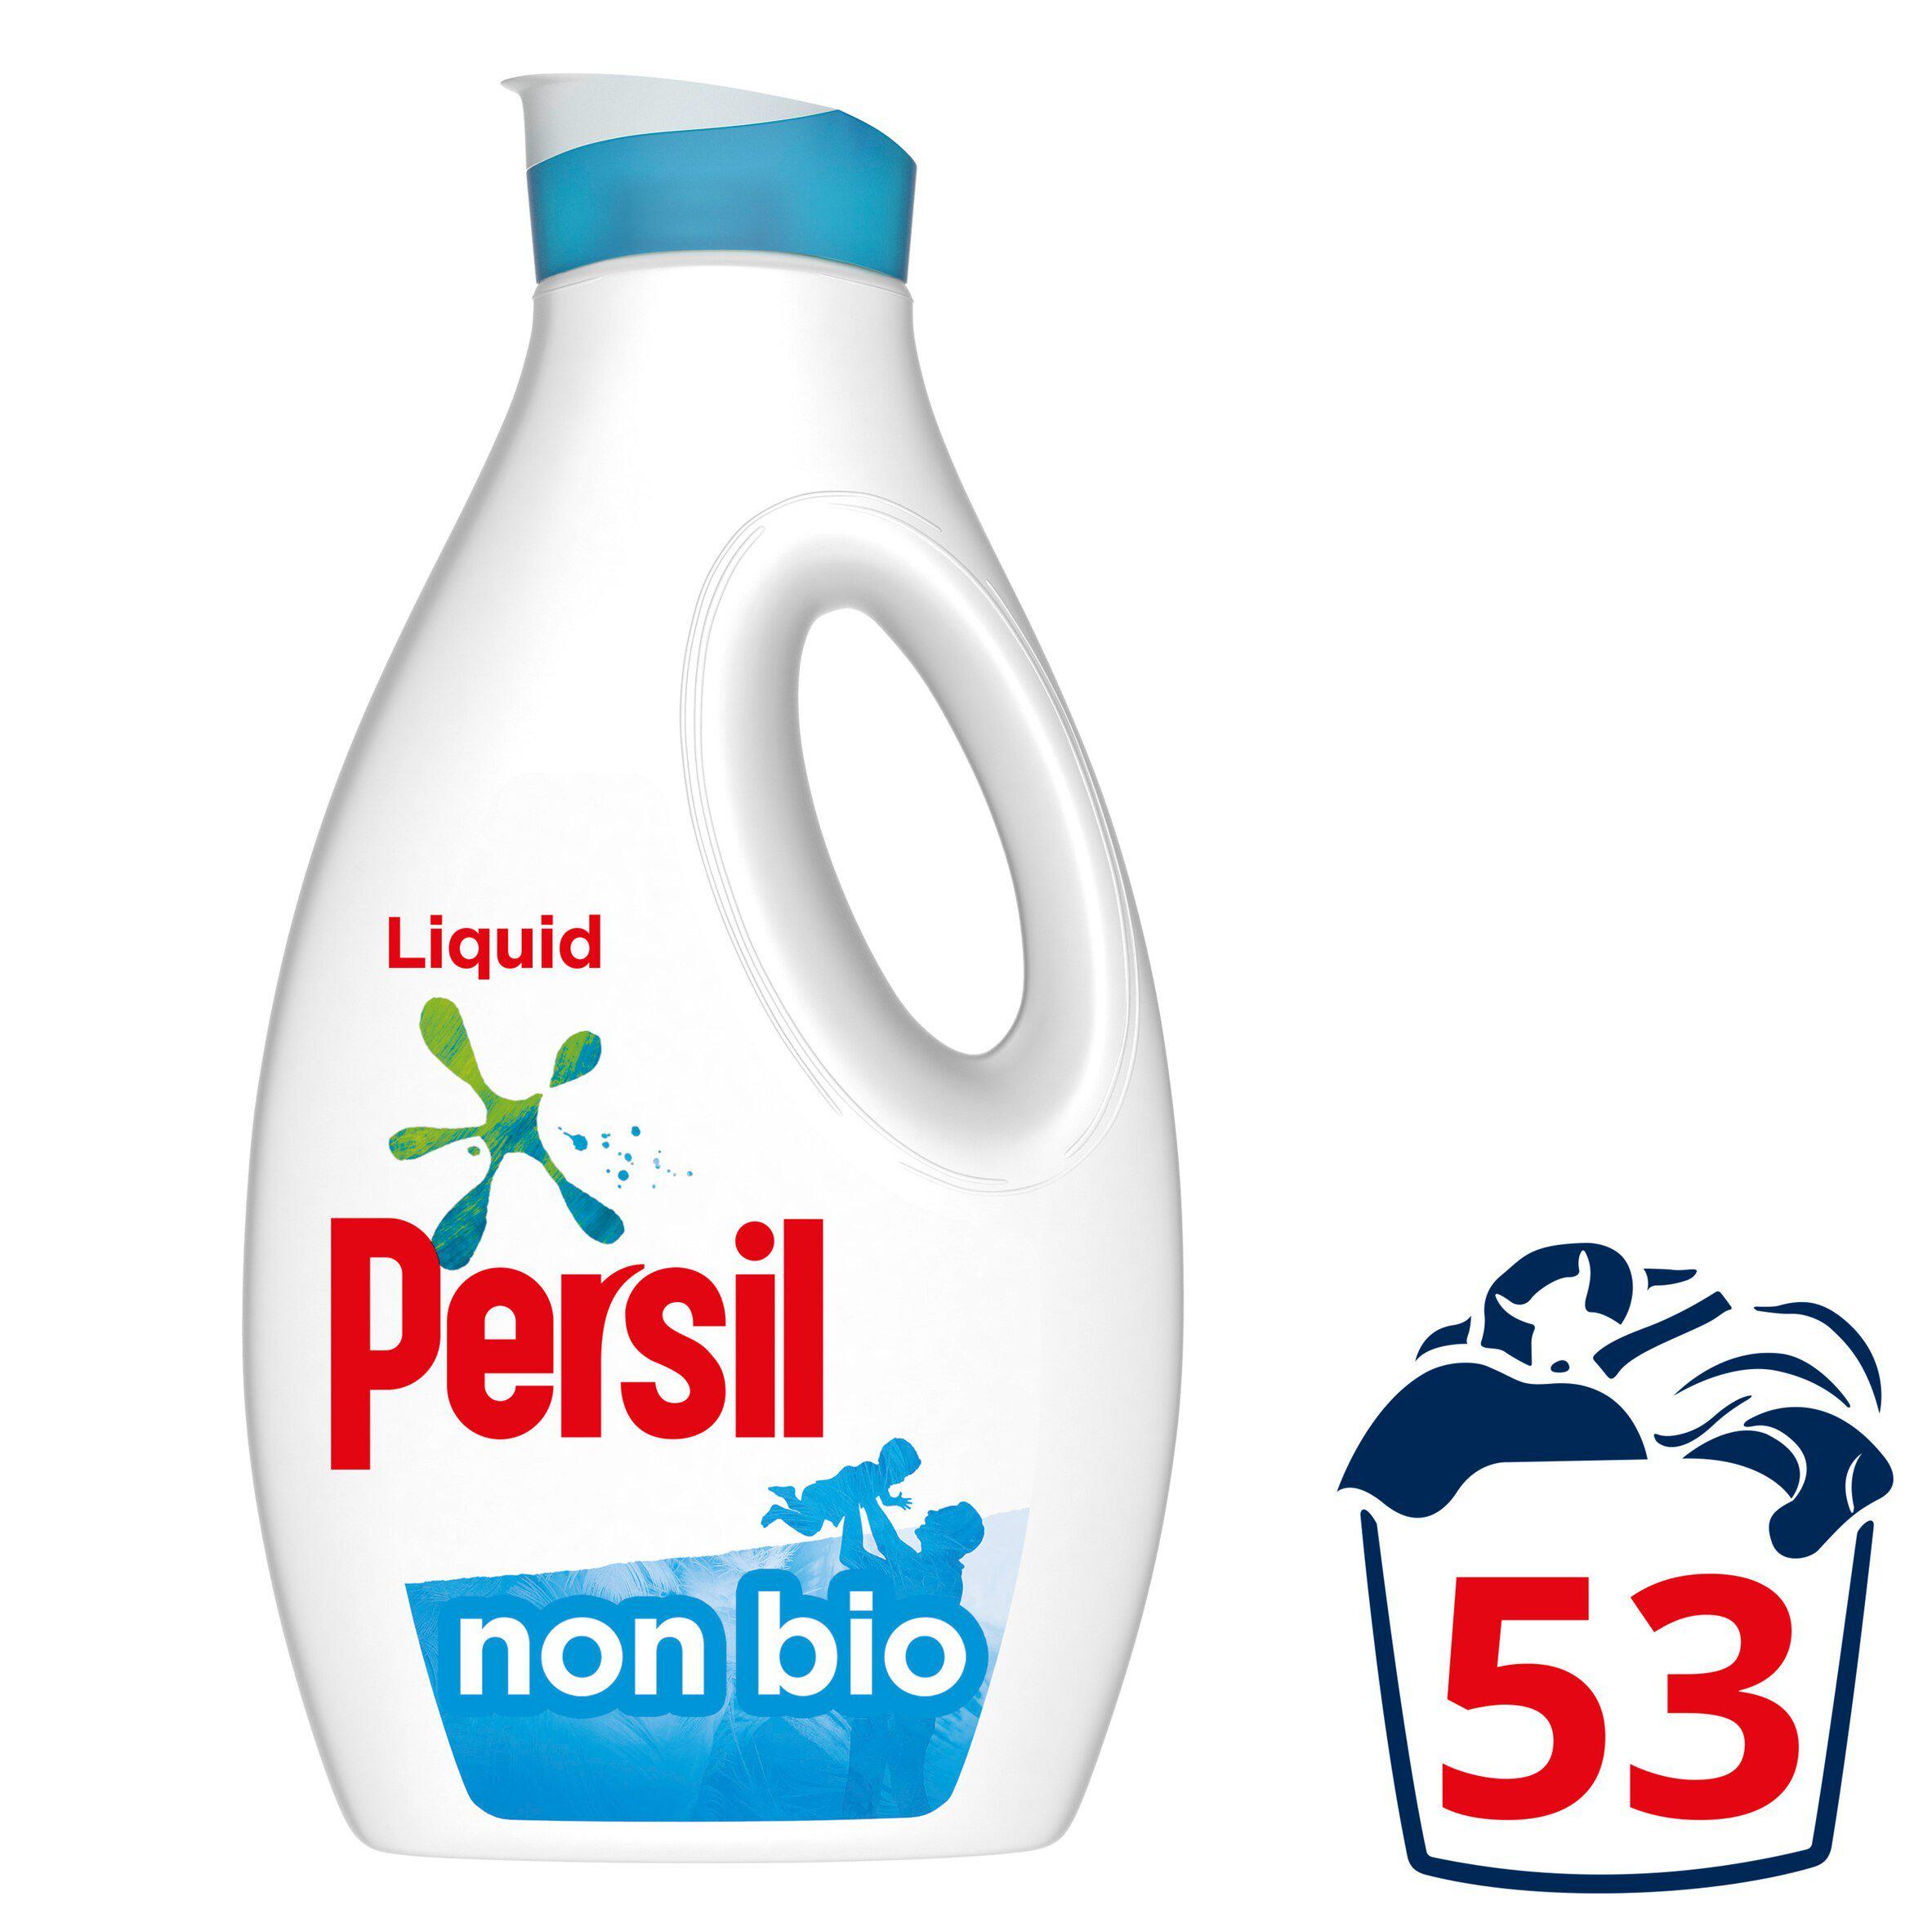 Use your Nectar card to get Persil liquid detergent non bio 53 washes, usually £9, for £5 at Sainsbury’s